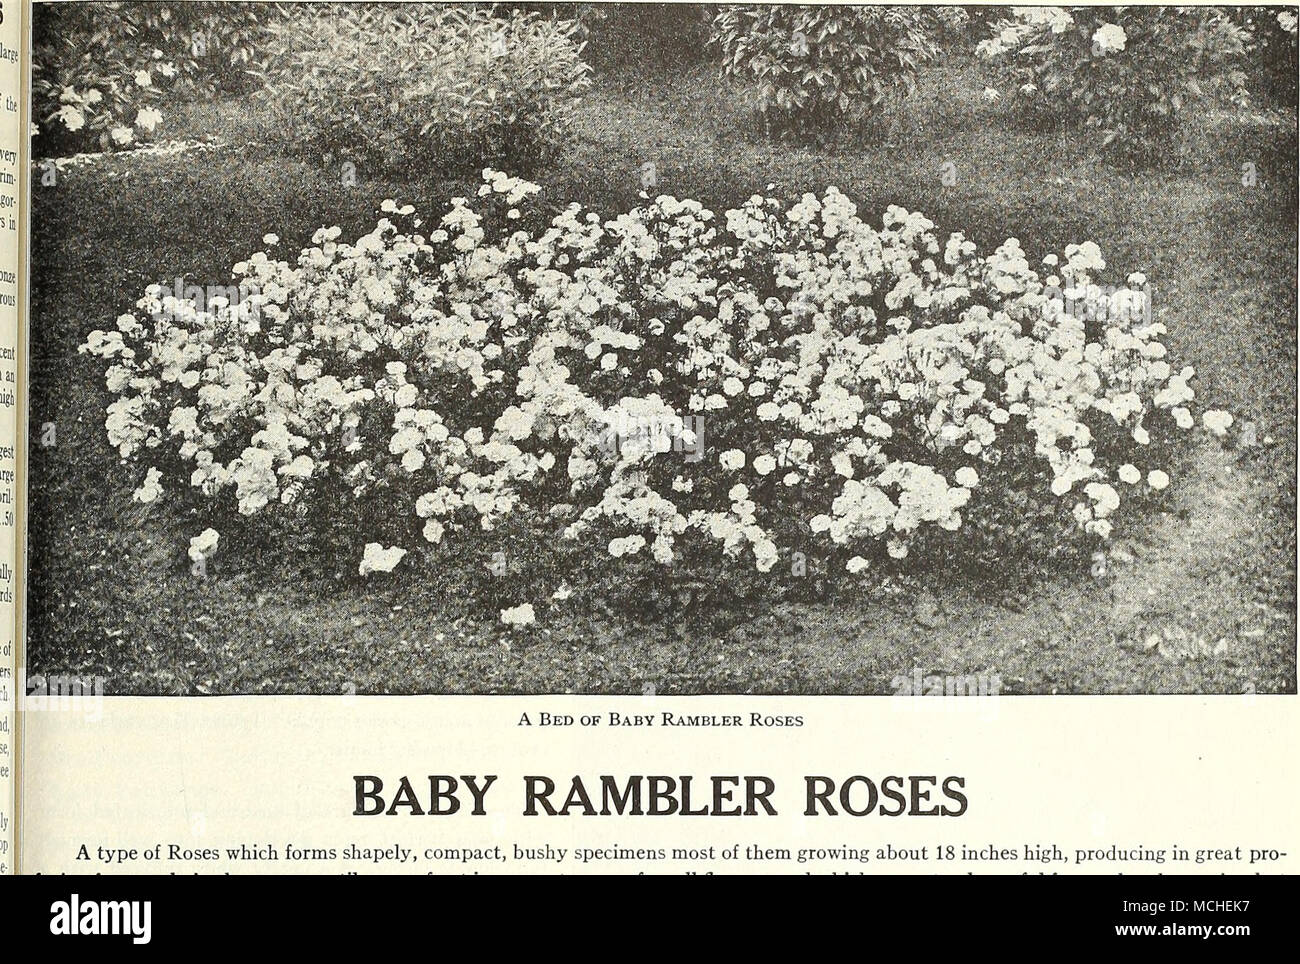 . BABY RAMBLER ROSES A type of Roses which forms shapely, compact, bushy specimens most of them growing about 18 inches high, producing in great pro- fusion from early in the season until severe frost immense trusses of small flowers, and which are not only useful for garden decoration but their dainty, graceful flowers are valuable for cutting. Pruning is not necessary; simply remove the past season's flower stems. Cecil Brunner {The Fairy, or Sweetheart Rose). A Polyantha variety with dainty double little flowers of perfect form produced in many flowered, graceful sprays; color a soft rosy-p Stock Photo